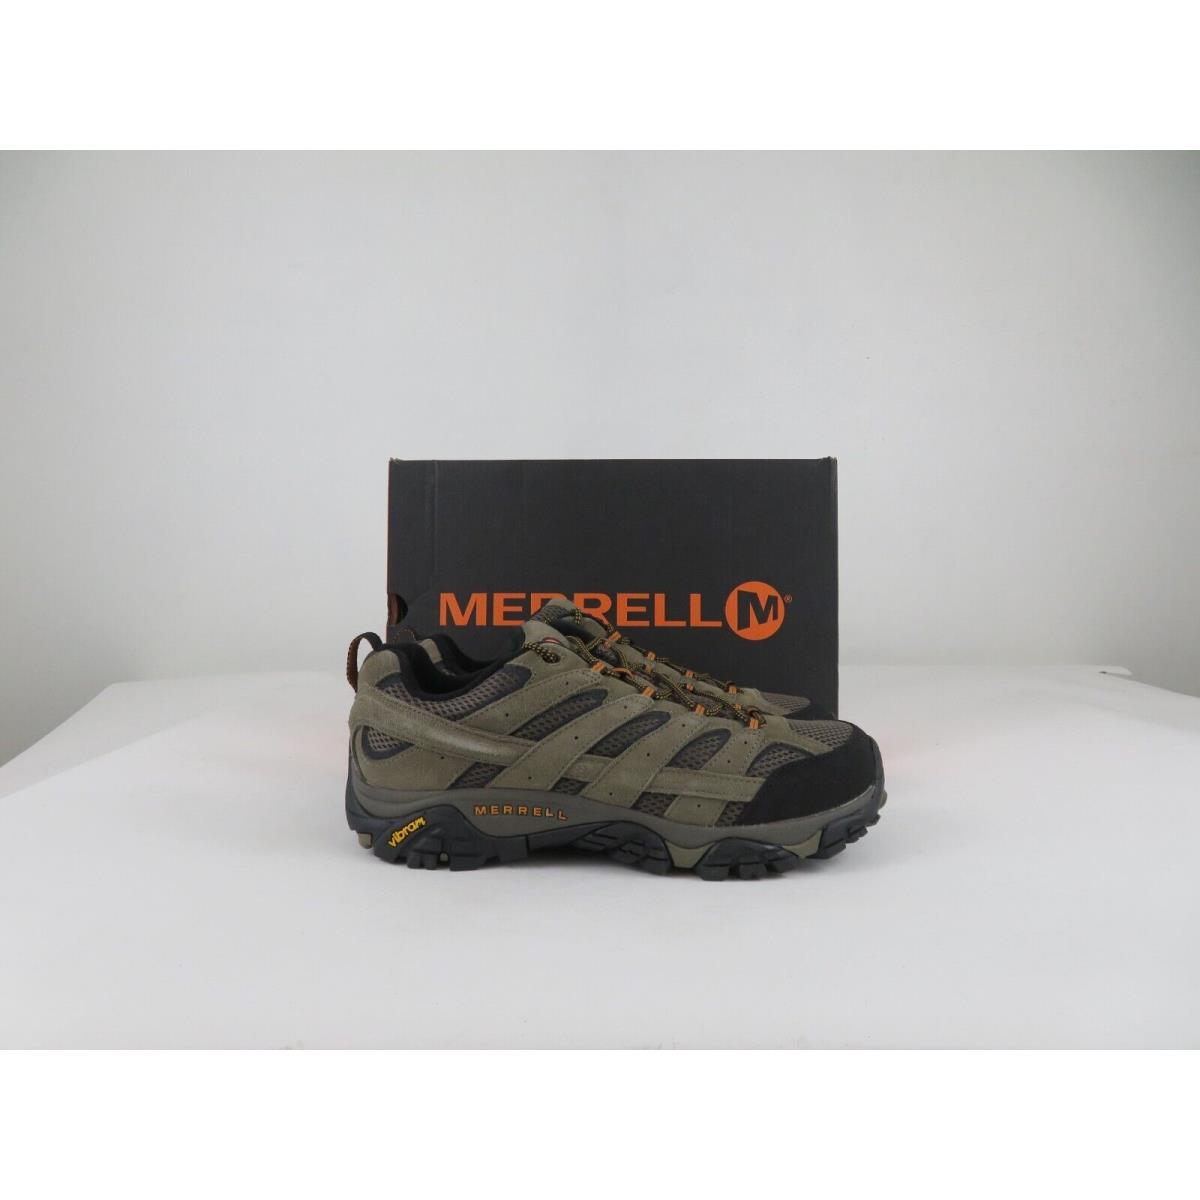 Merrell Moab 2 Vent Mens Shoes 11 M Walnut Brown Hiking Trail Leather Walking